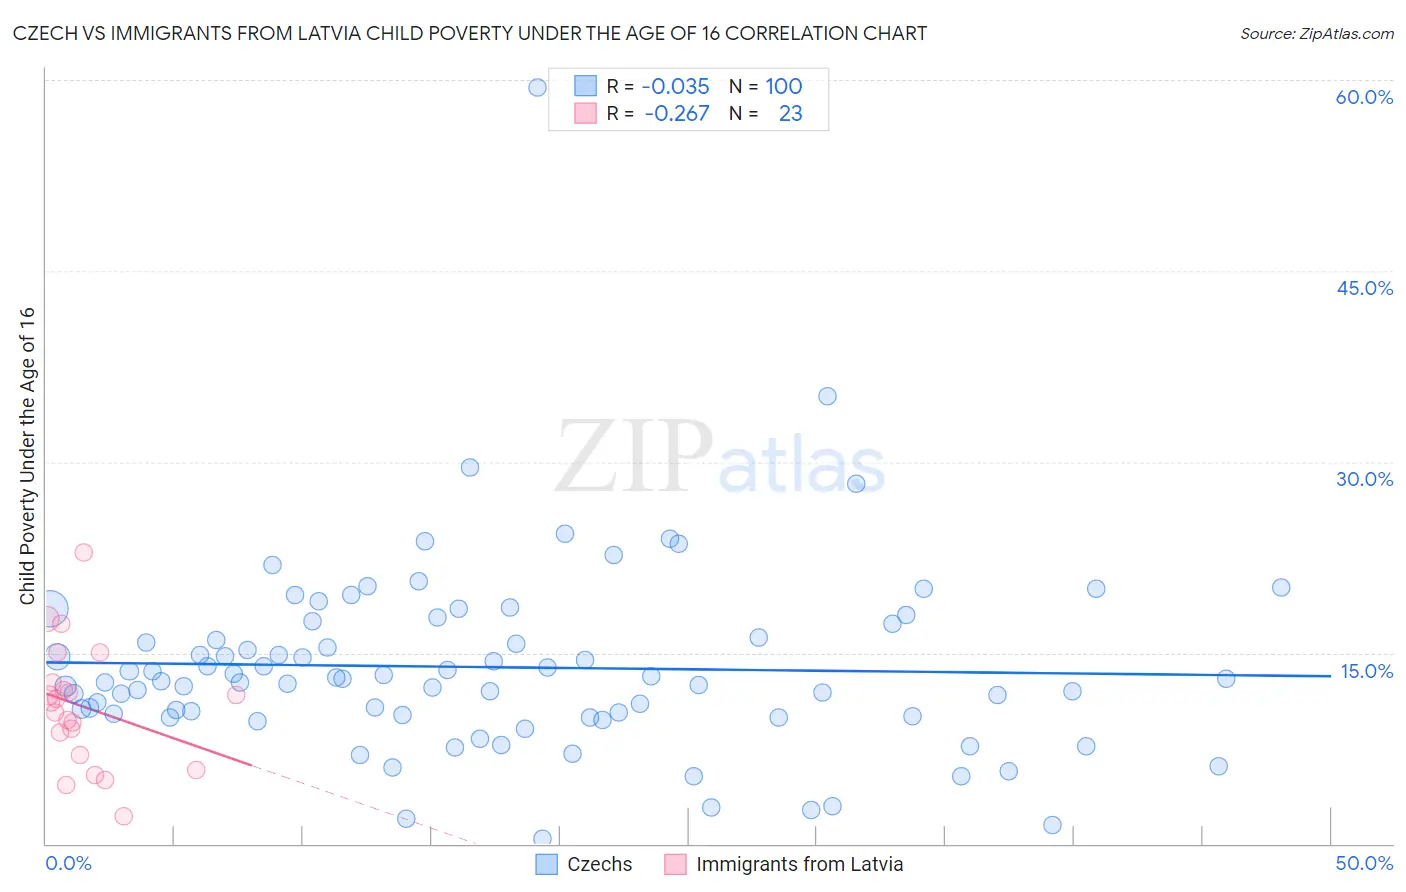 Czech vs Immigrants from Latvia Child Poverty Under the Age of 16